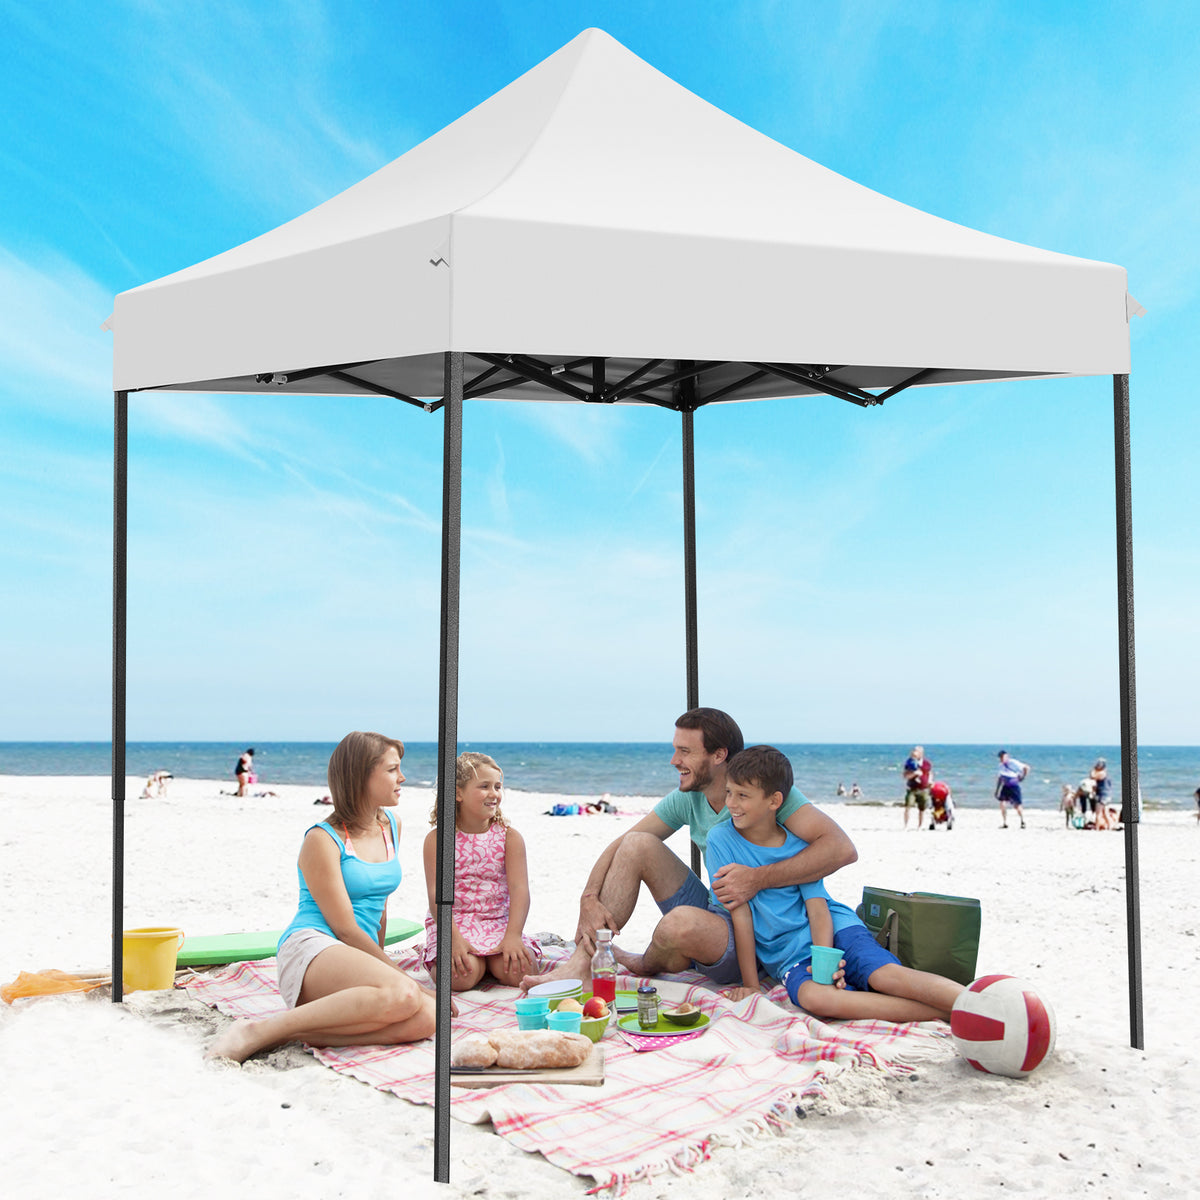 COBIZI 6.5x6.5ft Pop Up Tent,UPF50+ Waterproof Outdoor Tent,Portable,For Party,Beach,Garden,Camping,Comes with 1 Carrying Bag,3 Adjustable Heights